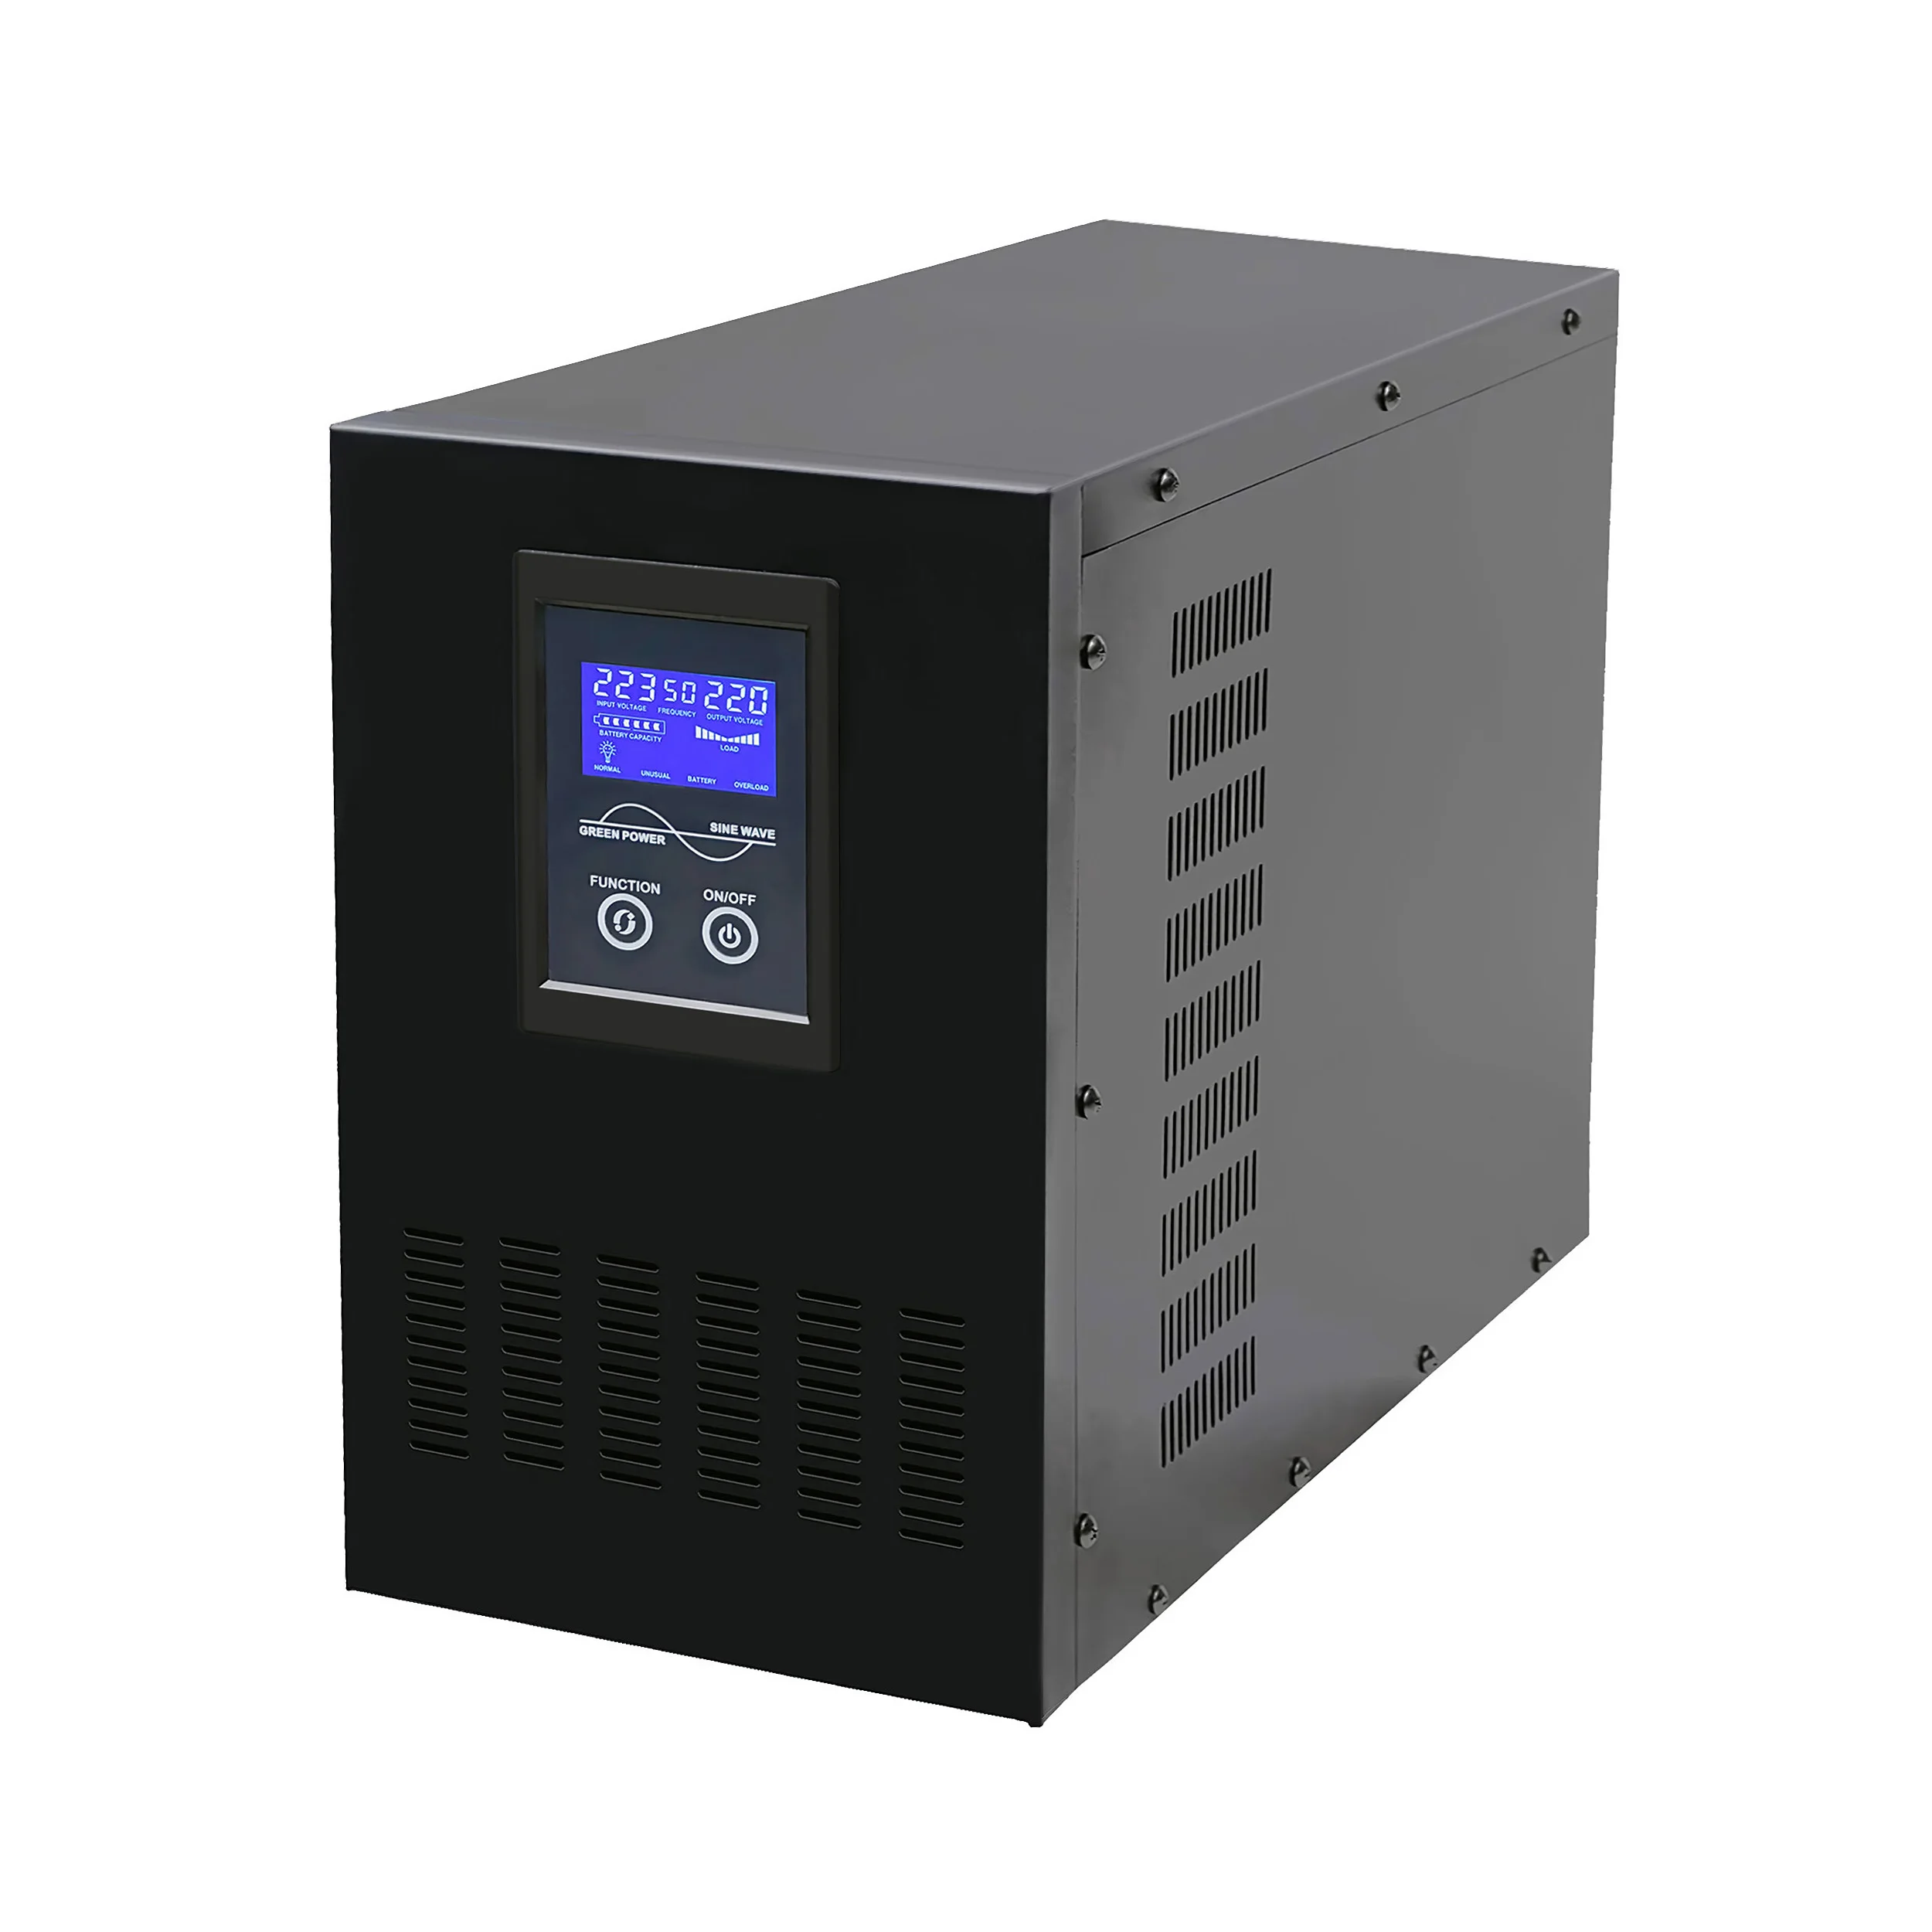 3kw Homage Inverter Ups With Battery Charger 12v 24v 220v Prices In  Pakistan - Buy 12v 220v Inverter With Battery Charger,Inverter 24v 220v  3000w,3kw Homage Inverter Ups Prices In Pakistan Product on